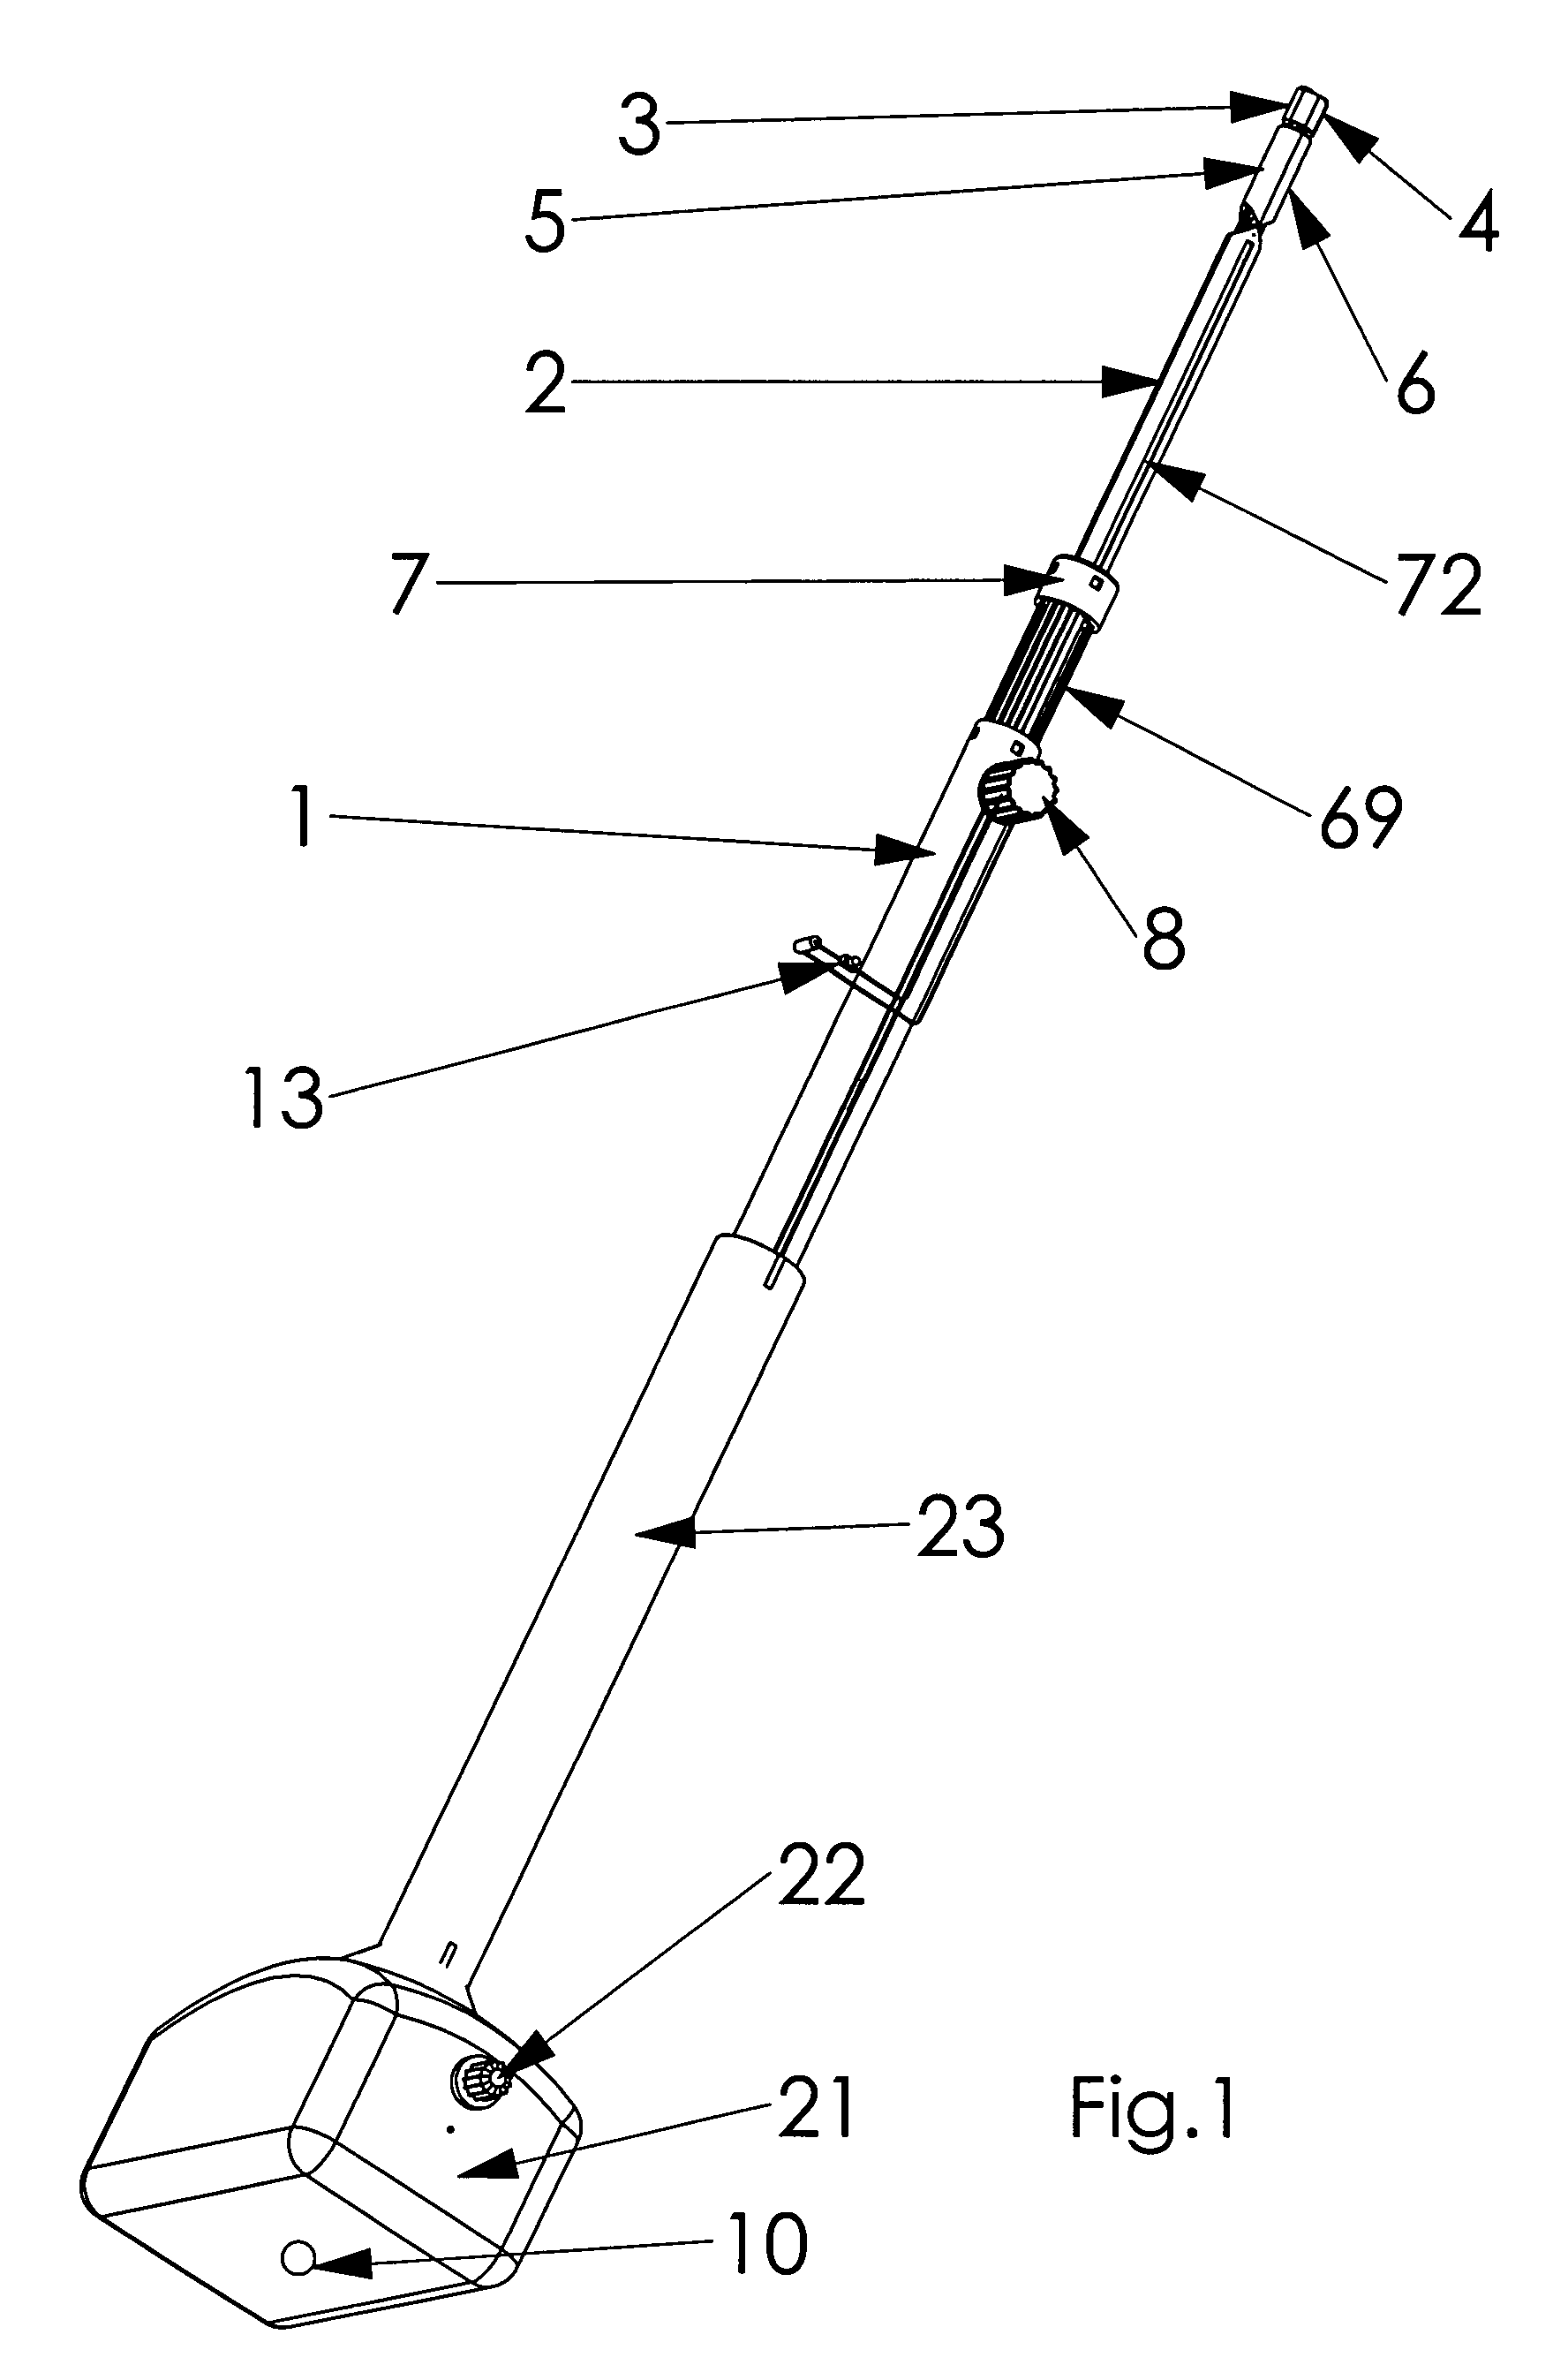 Endoscopic System and Method for Therapeutic Applications and Obtaining 3-Dimensional Human Vision Simulated Imaging With Real Dynamic Convergence